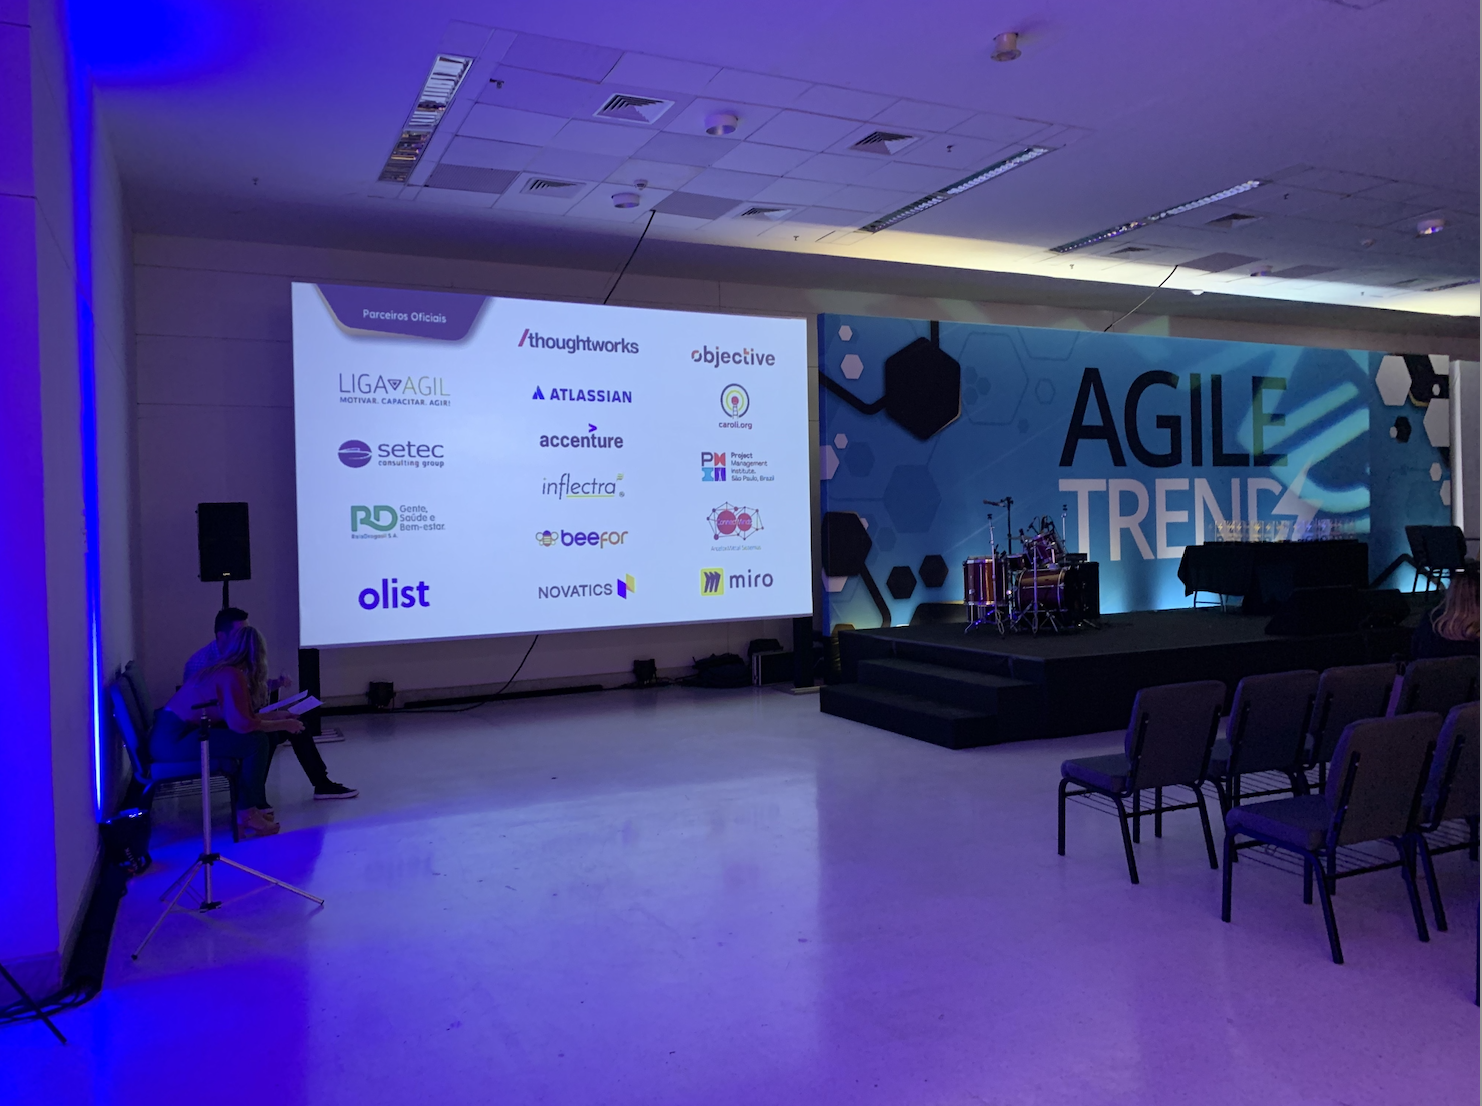 Inflectra-at-agile-trends-2022-image